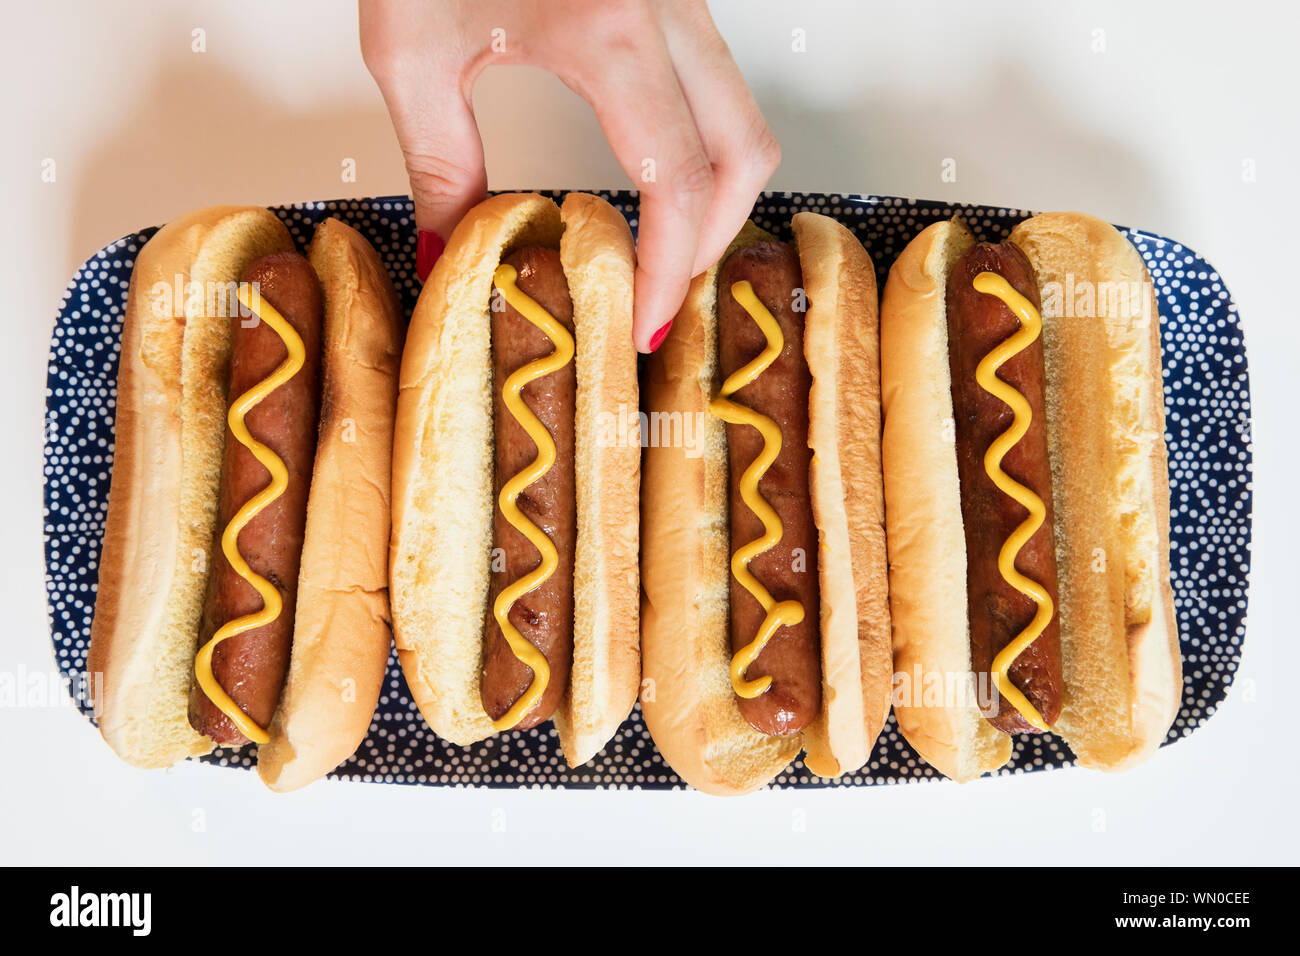 Woman's hand taking hot dog off of tray Stock Photo